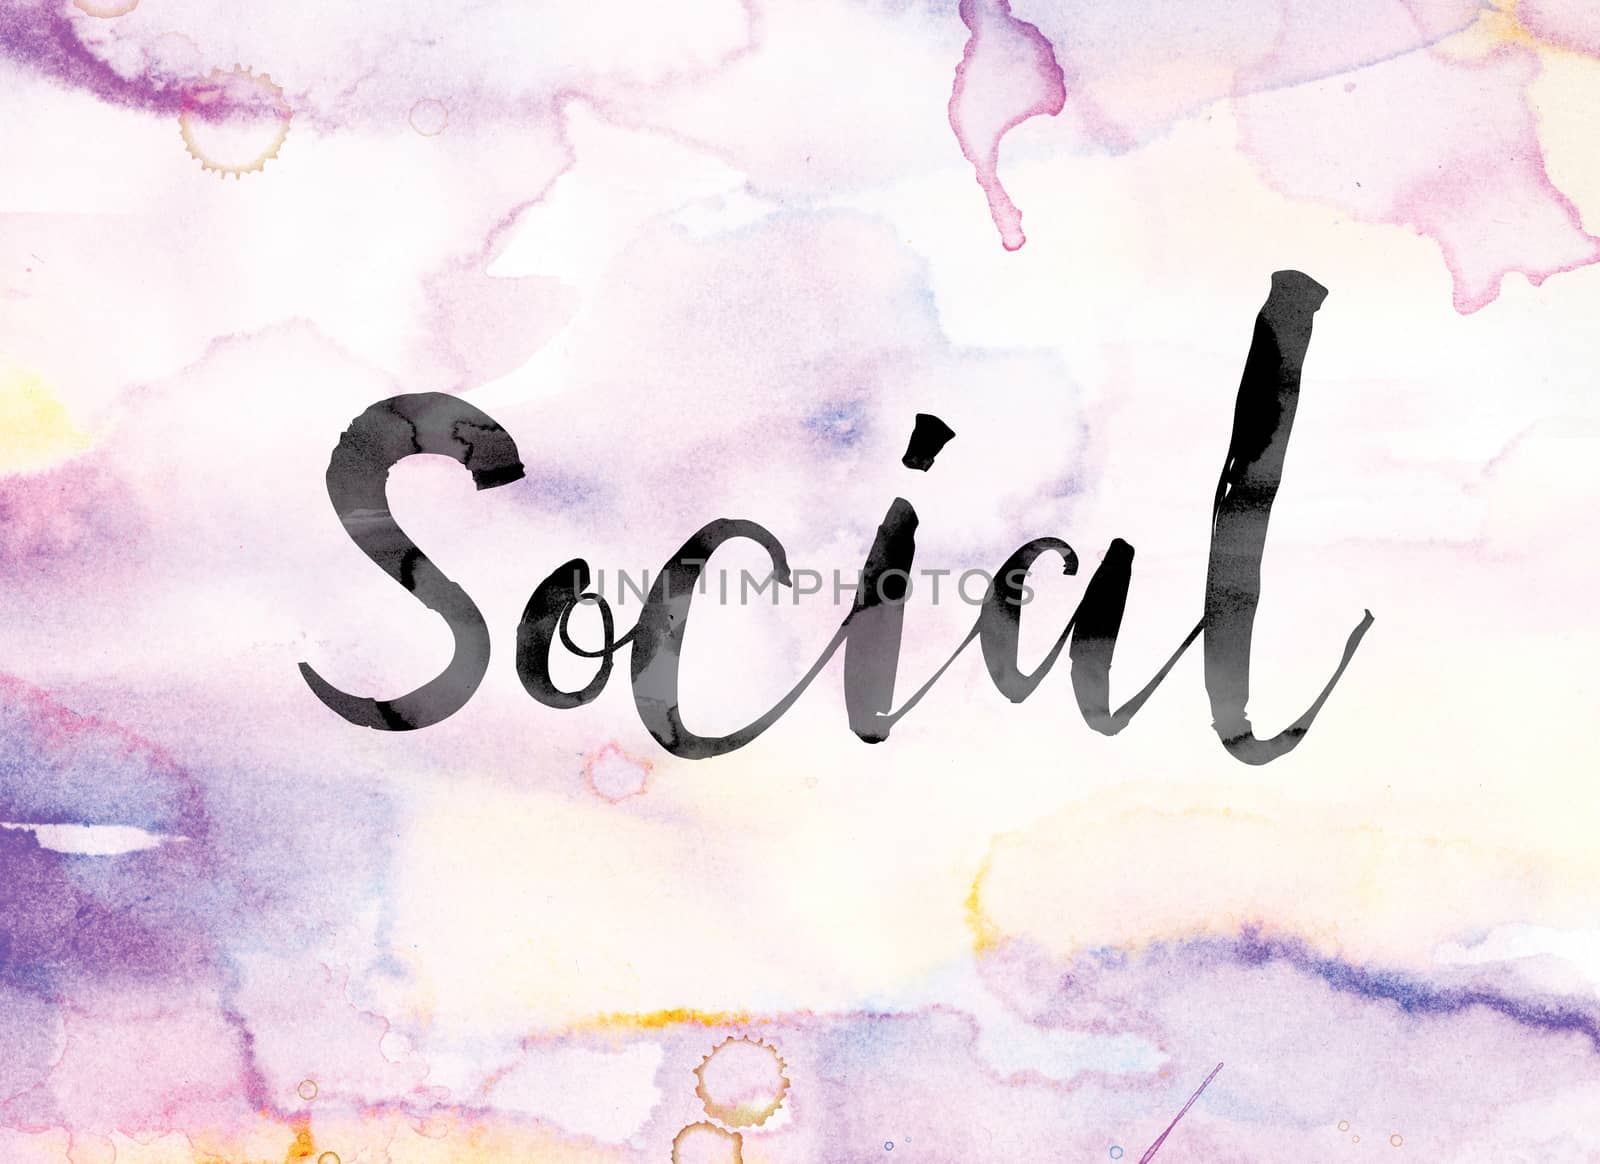 The word "Social" painted in black ink over a colorful watercolor washed background concept and theme.